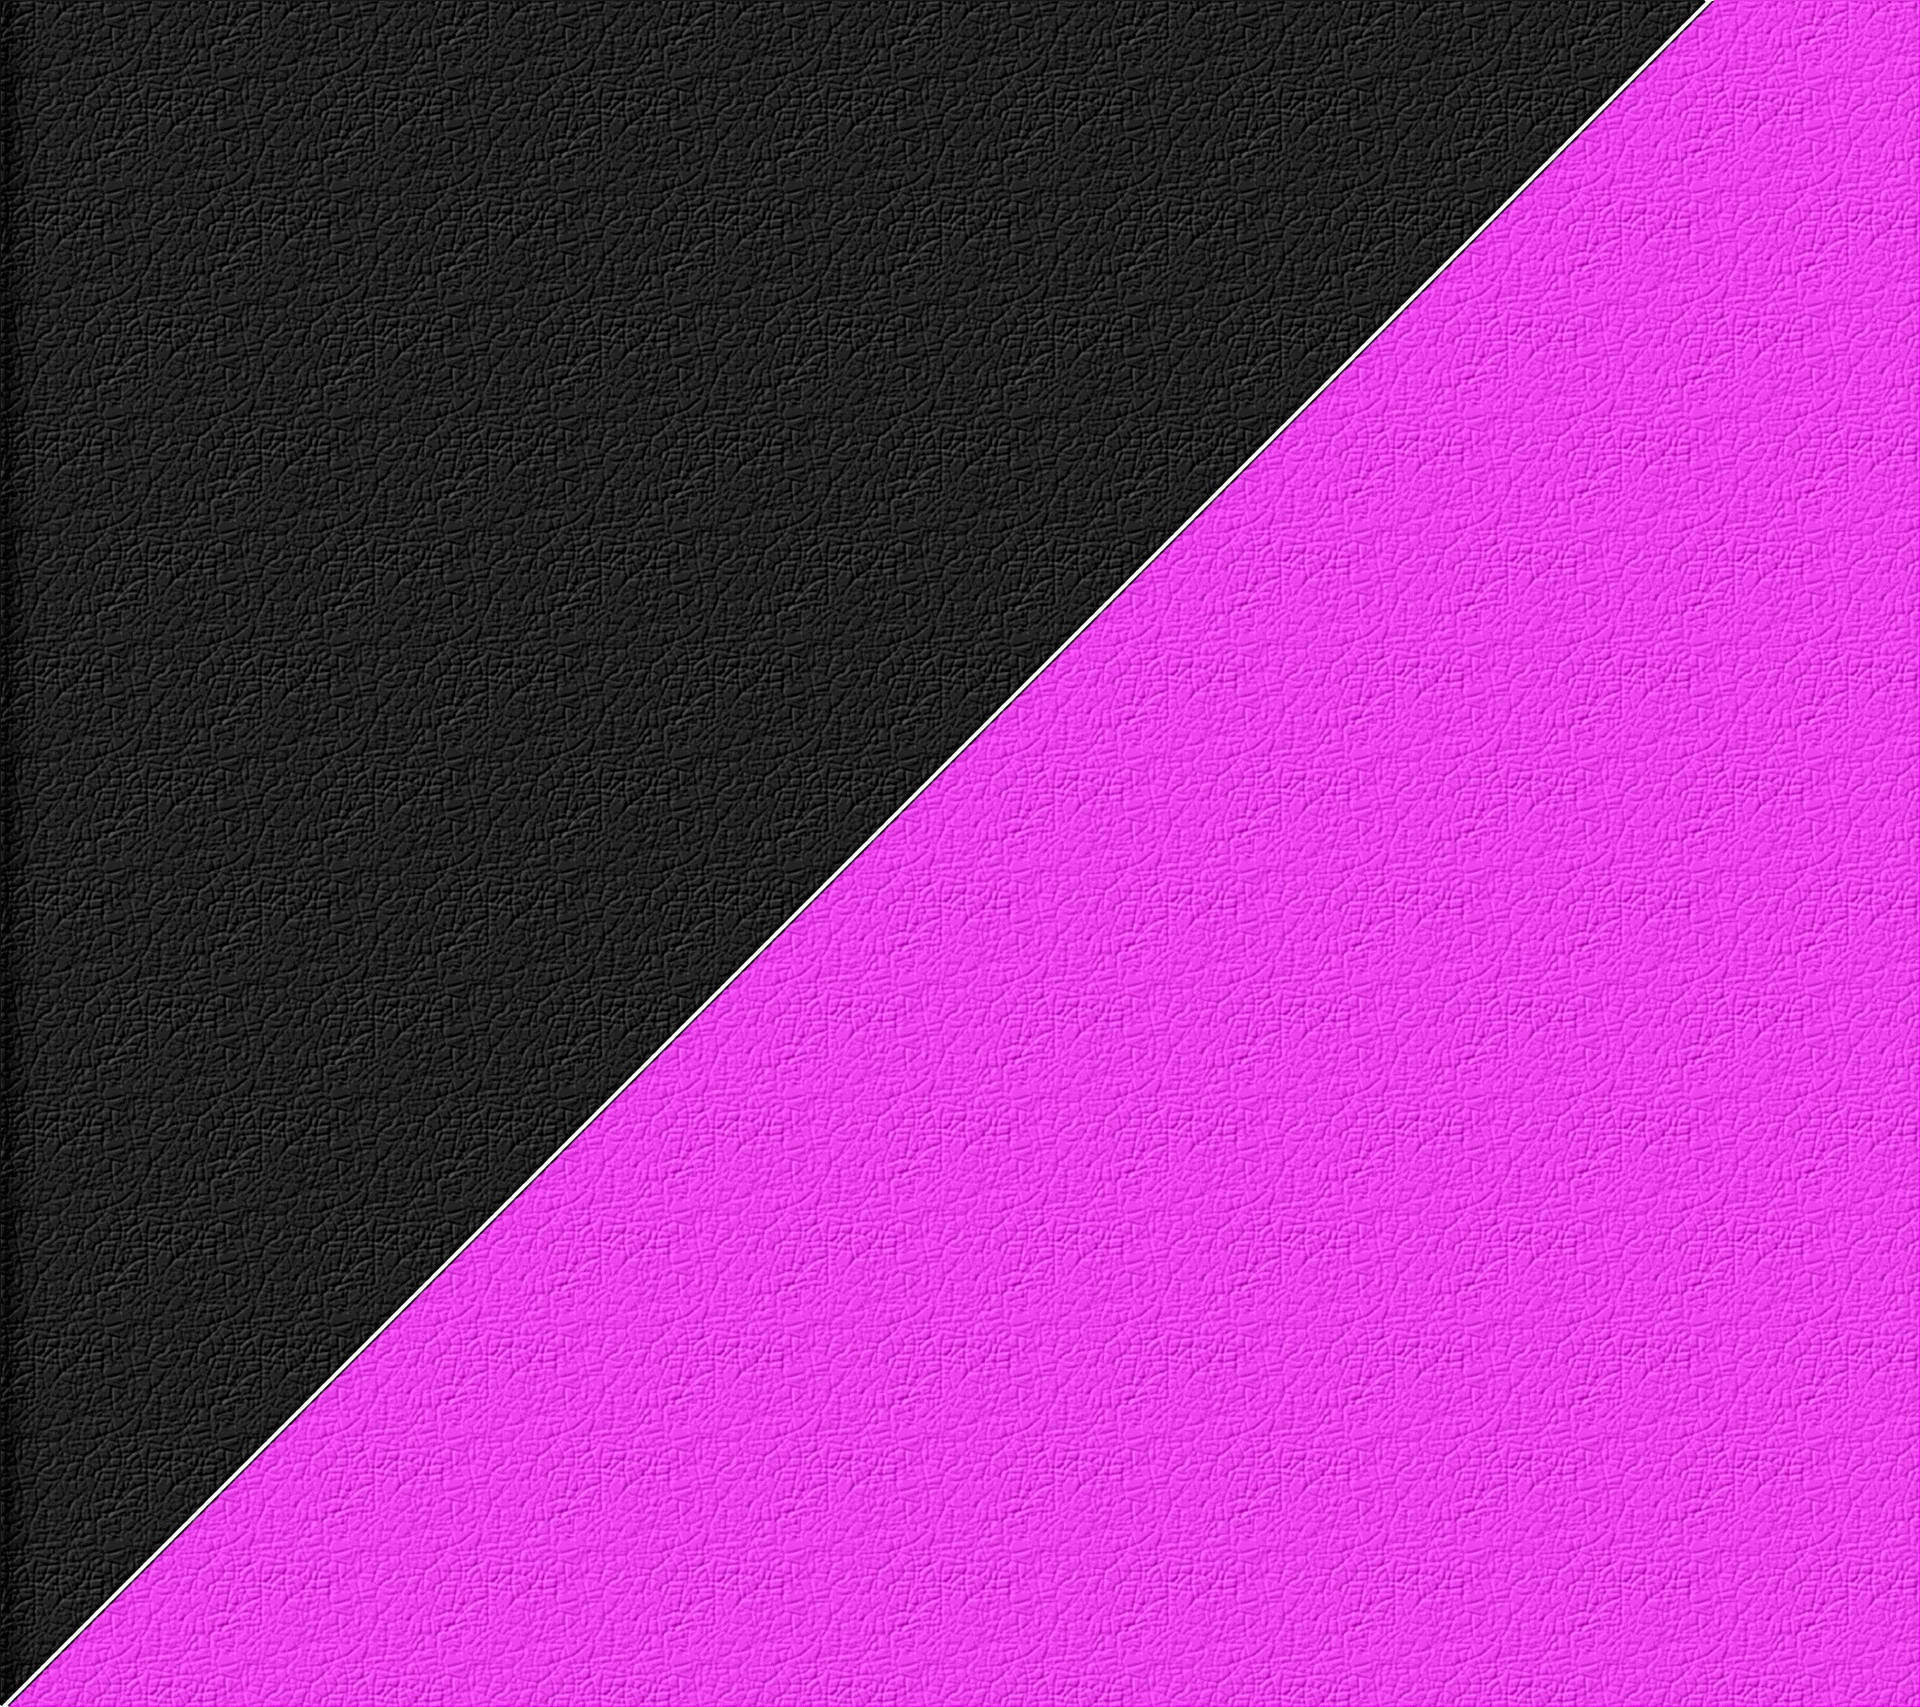 Black And Pink Aesthetic Leather Texture Wallpaper